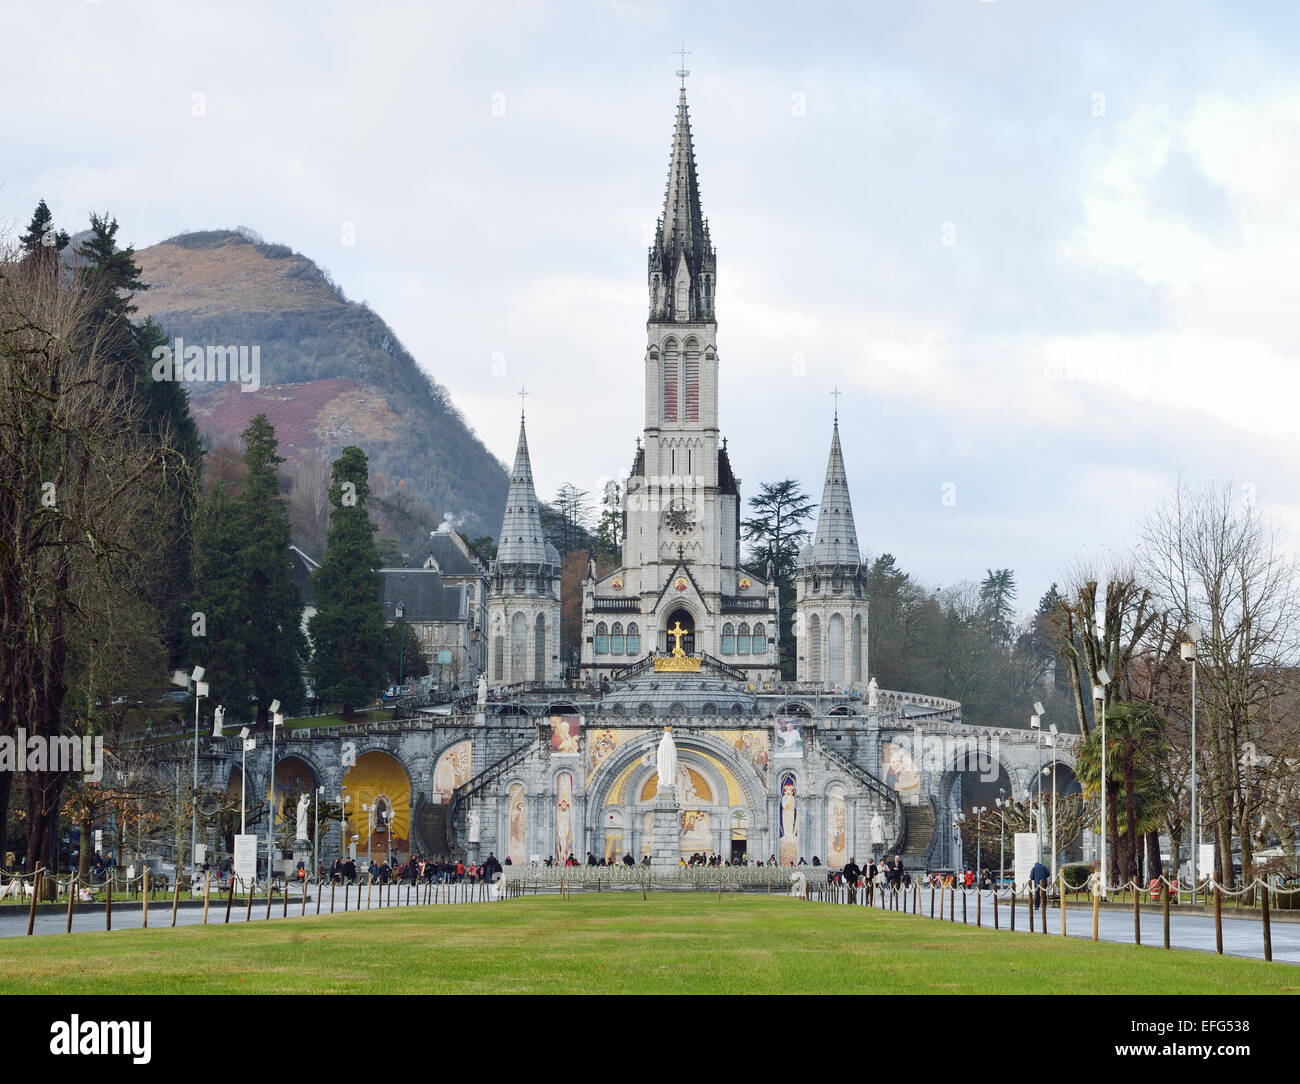 The Sanctuary of Our Lady of Lourdes Stock Photo